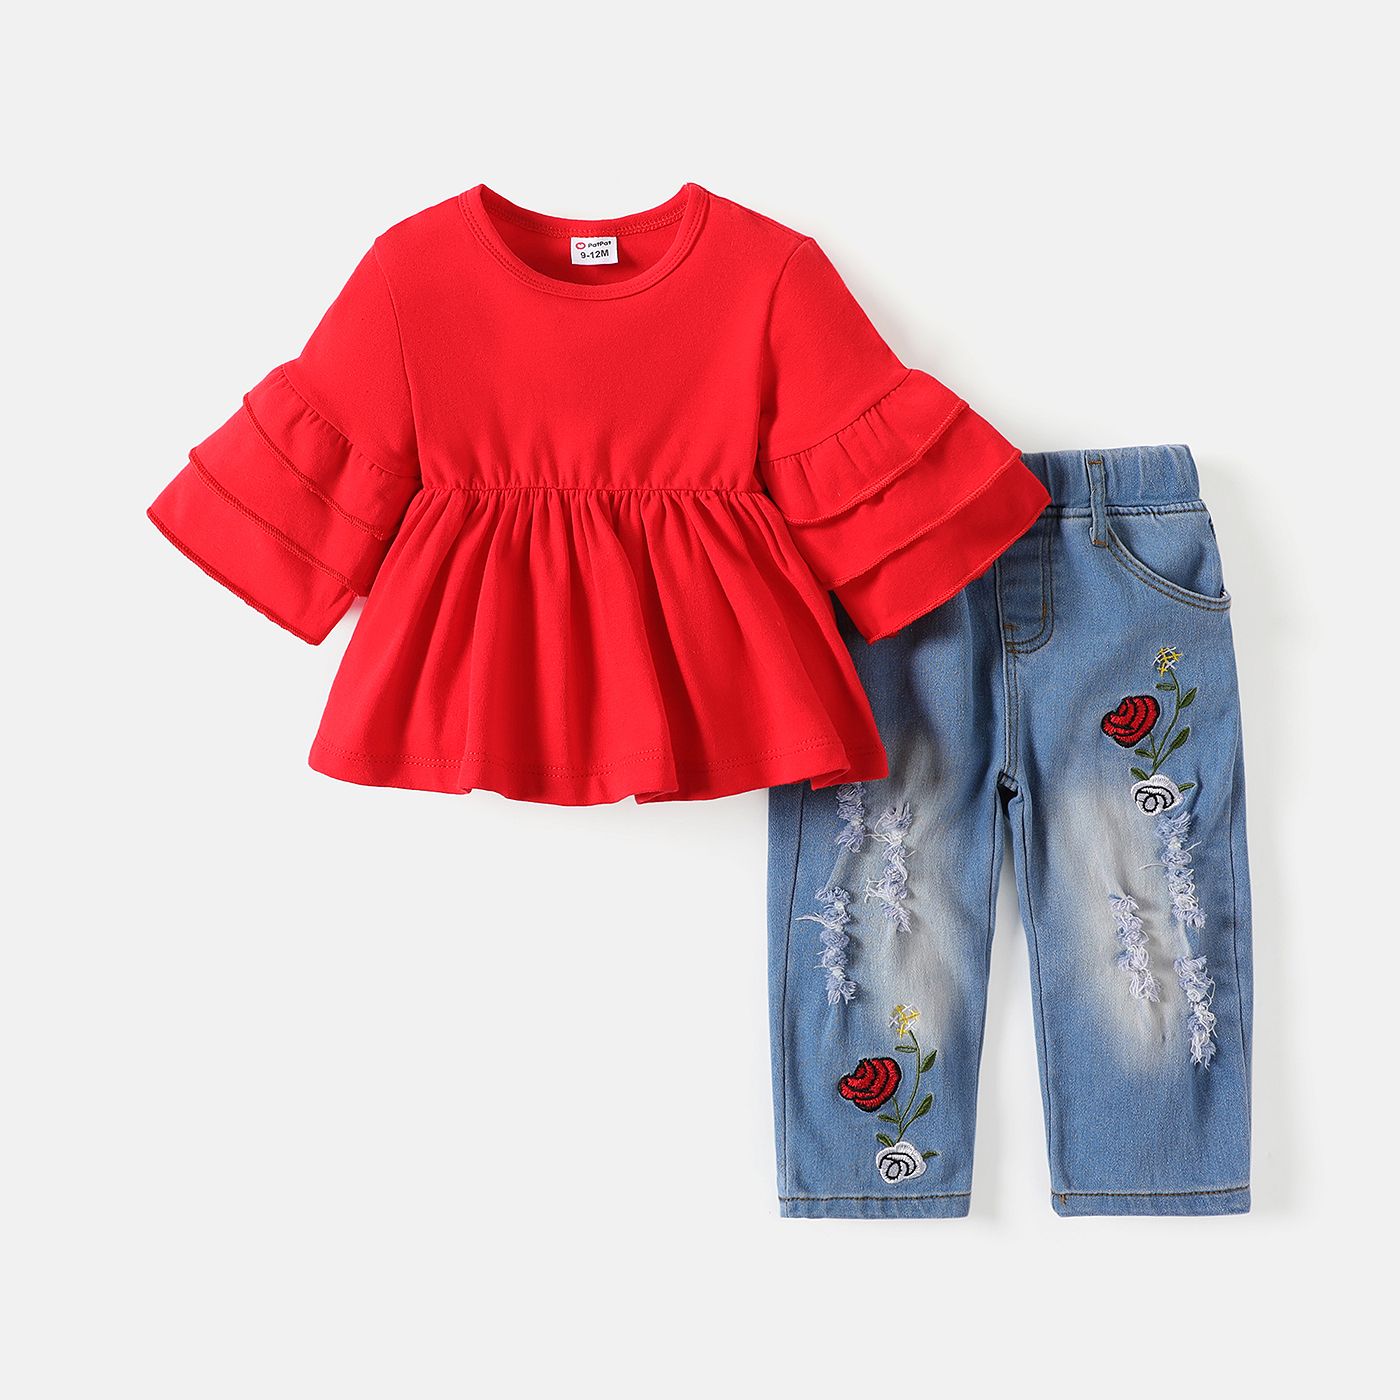 2pcs Baby Girl Cotton Layered Ruffle Trim Flare-sleeve Top And Rose Floral Embroidered Ripped Jeans Set